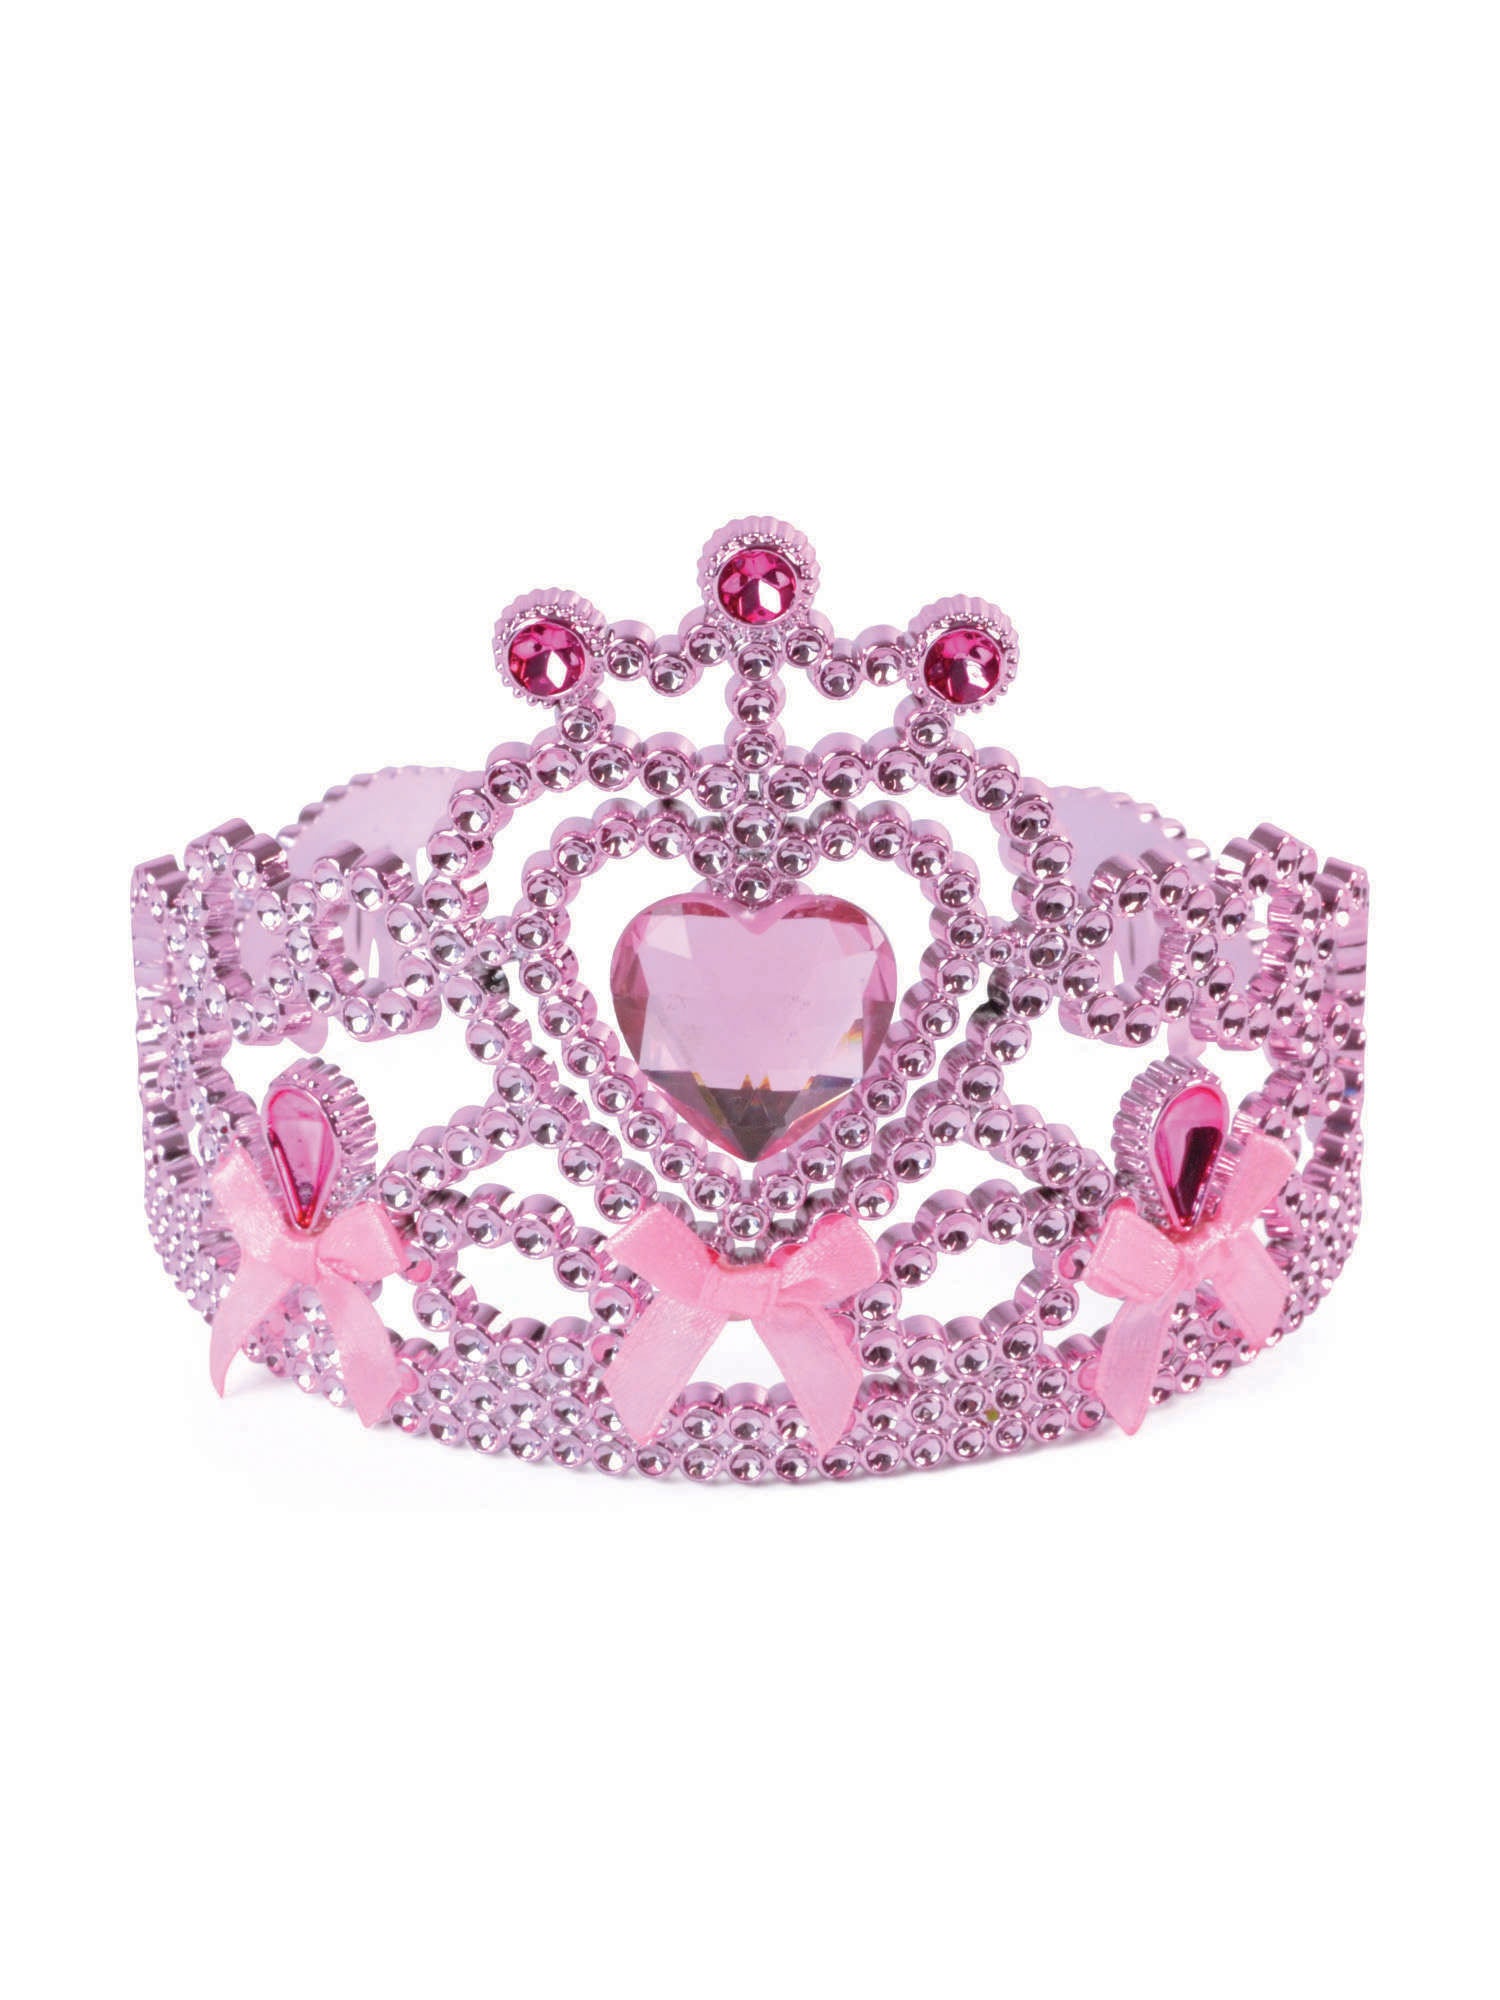 Tiara, Pink, Generic, Accessories, One Size, Front